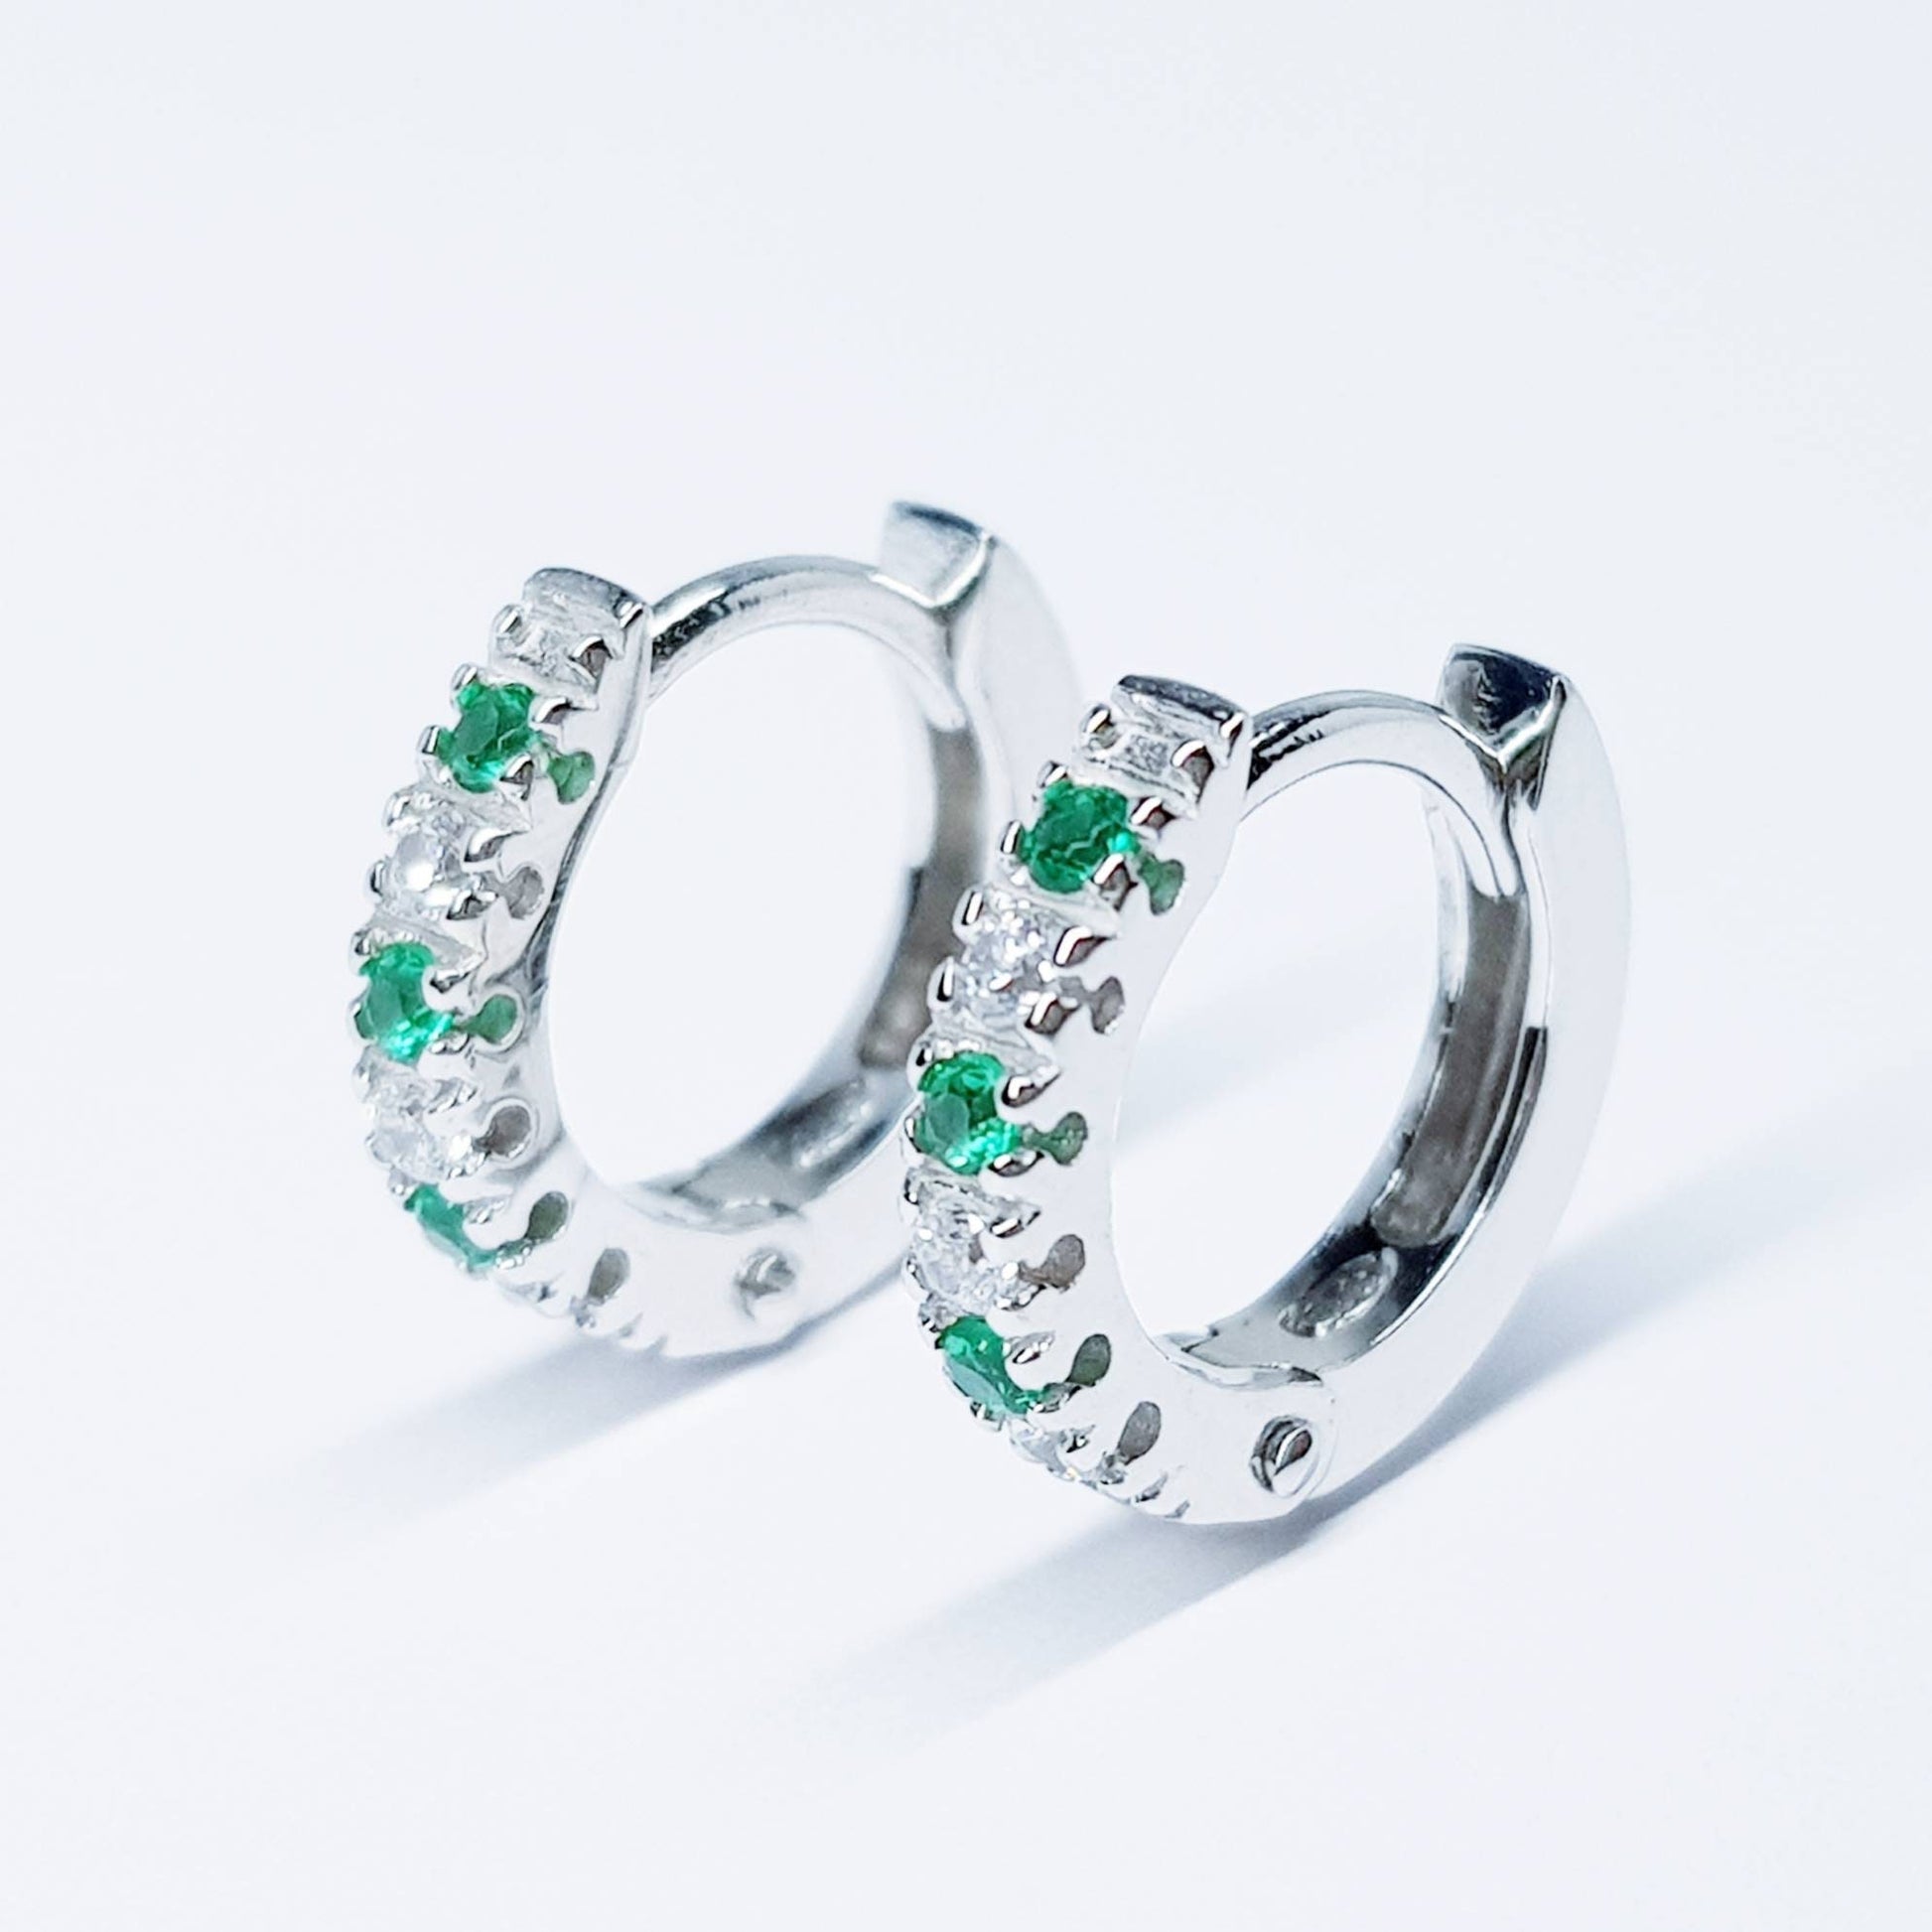 Small silver hoops with green and white CZs, mini hoop earrings, second hole huggies